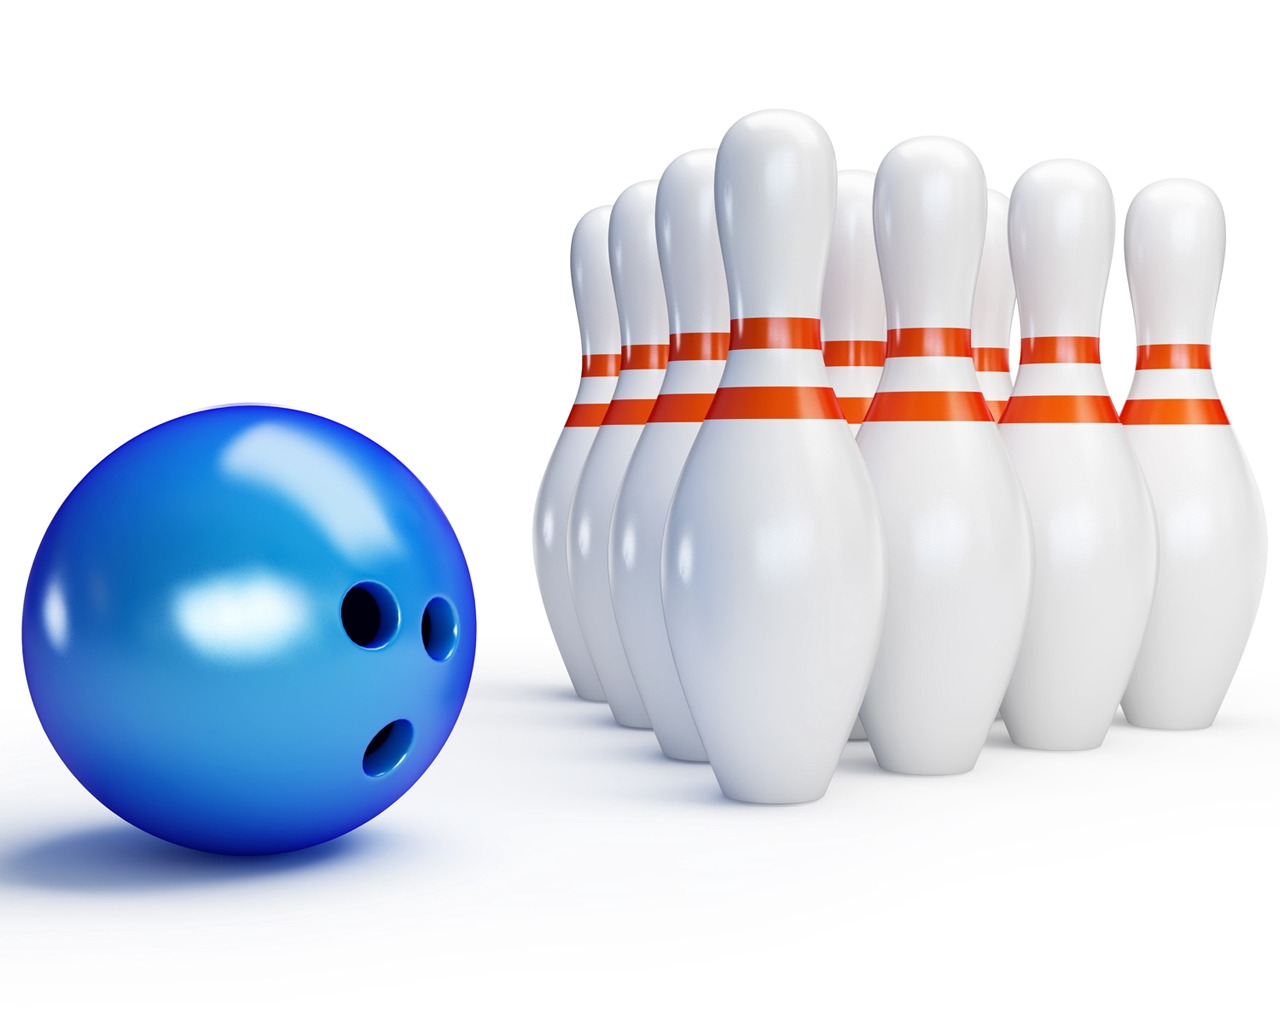 Bowling for 1280 x 1024 resolution